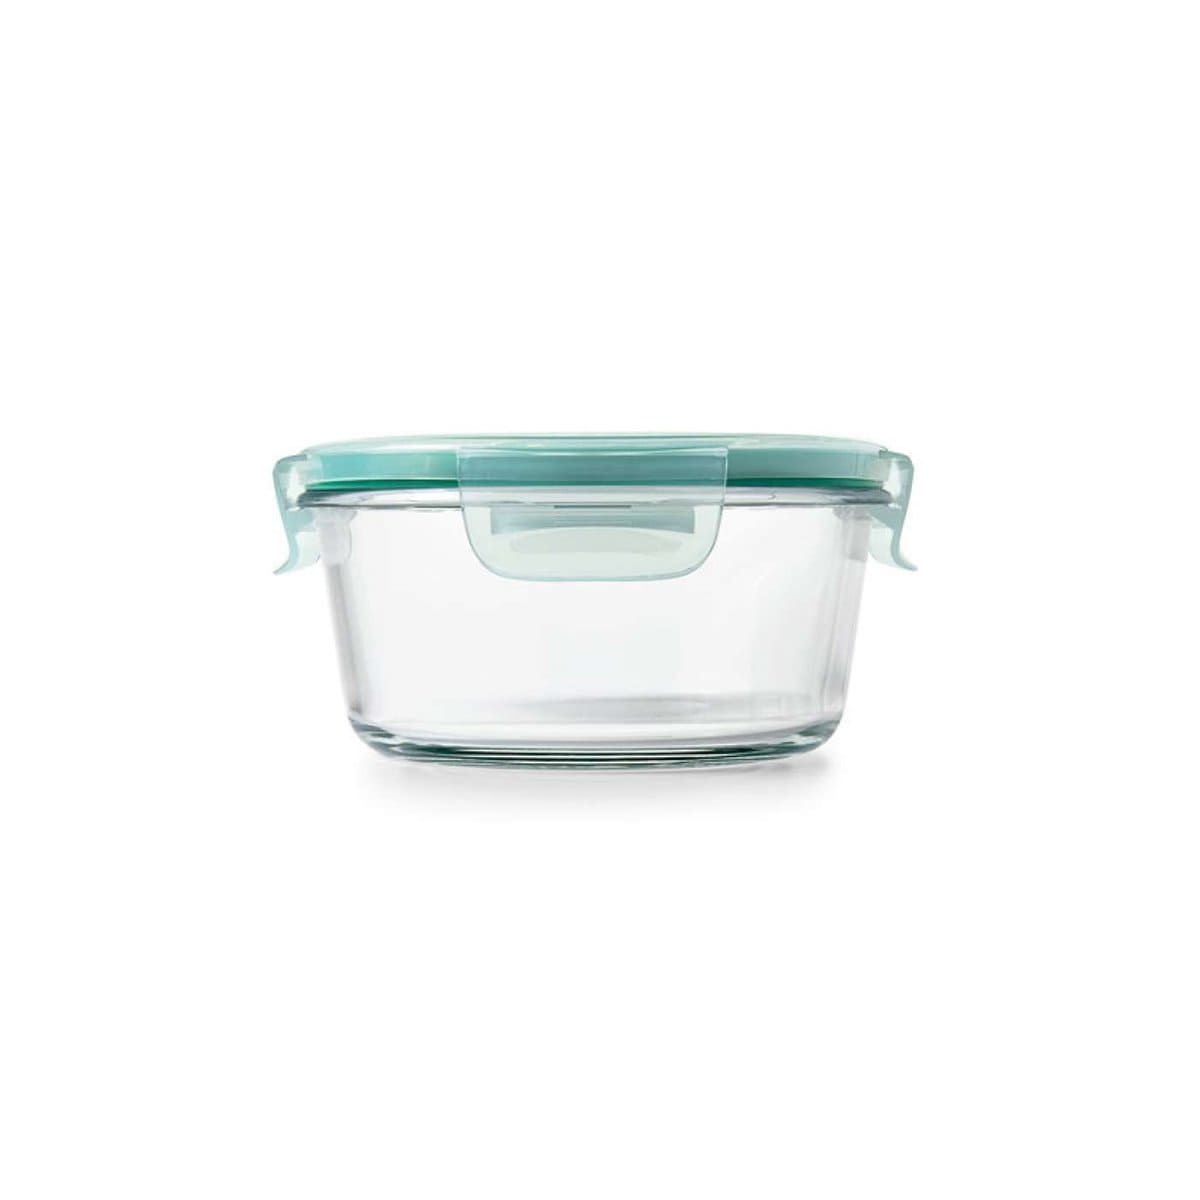 https://cdn.shopify.com/s/files/1/0474/2338/9856/products/oxo-oxo-good-grips-snap-glass-round-container-4-cup-29358-20086218883232_1600x.jpg?v=1628218781